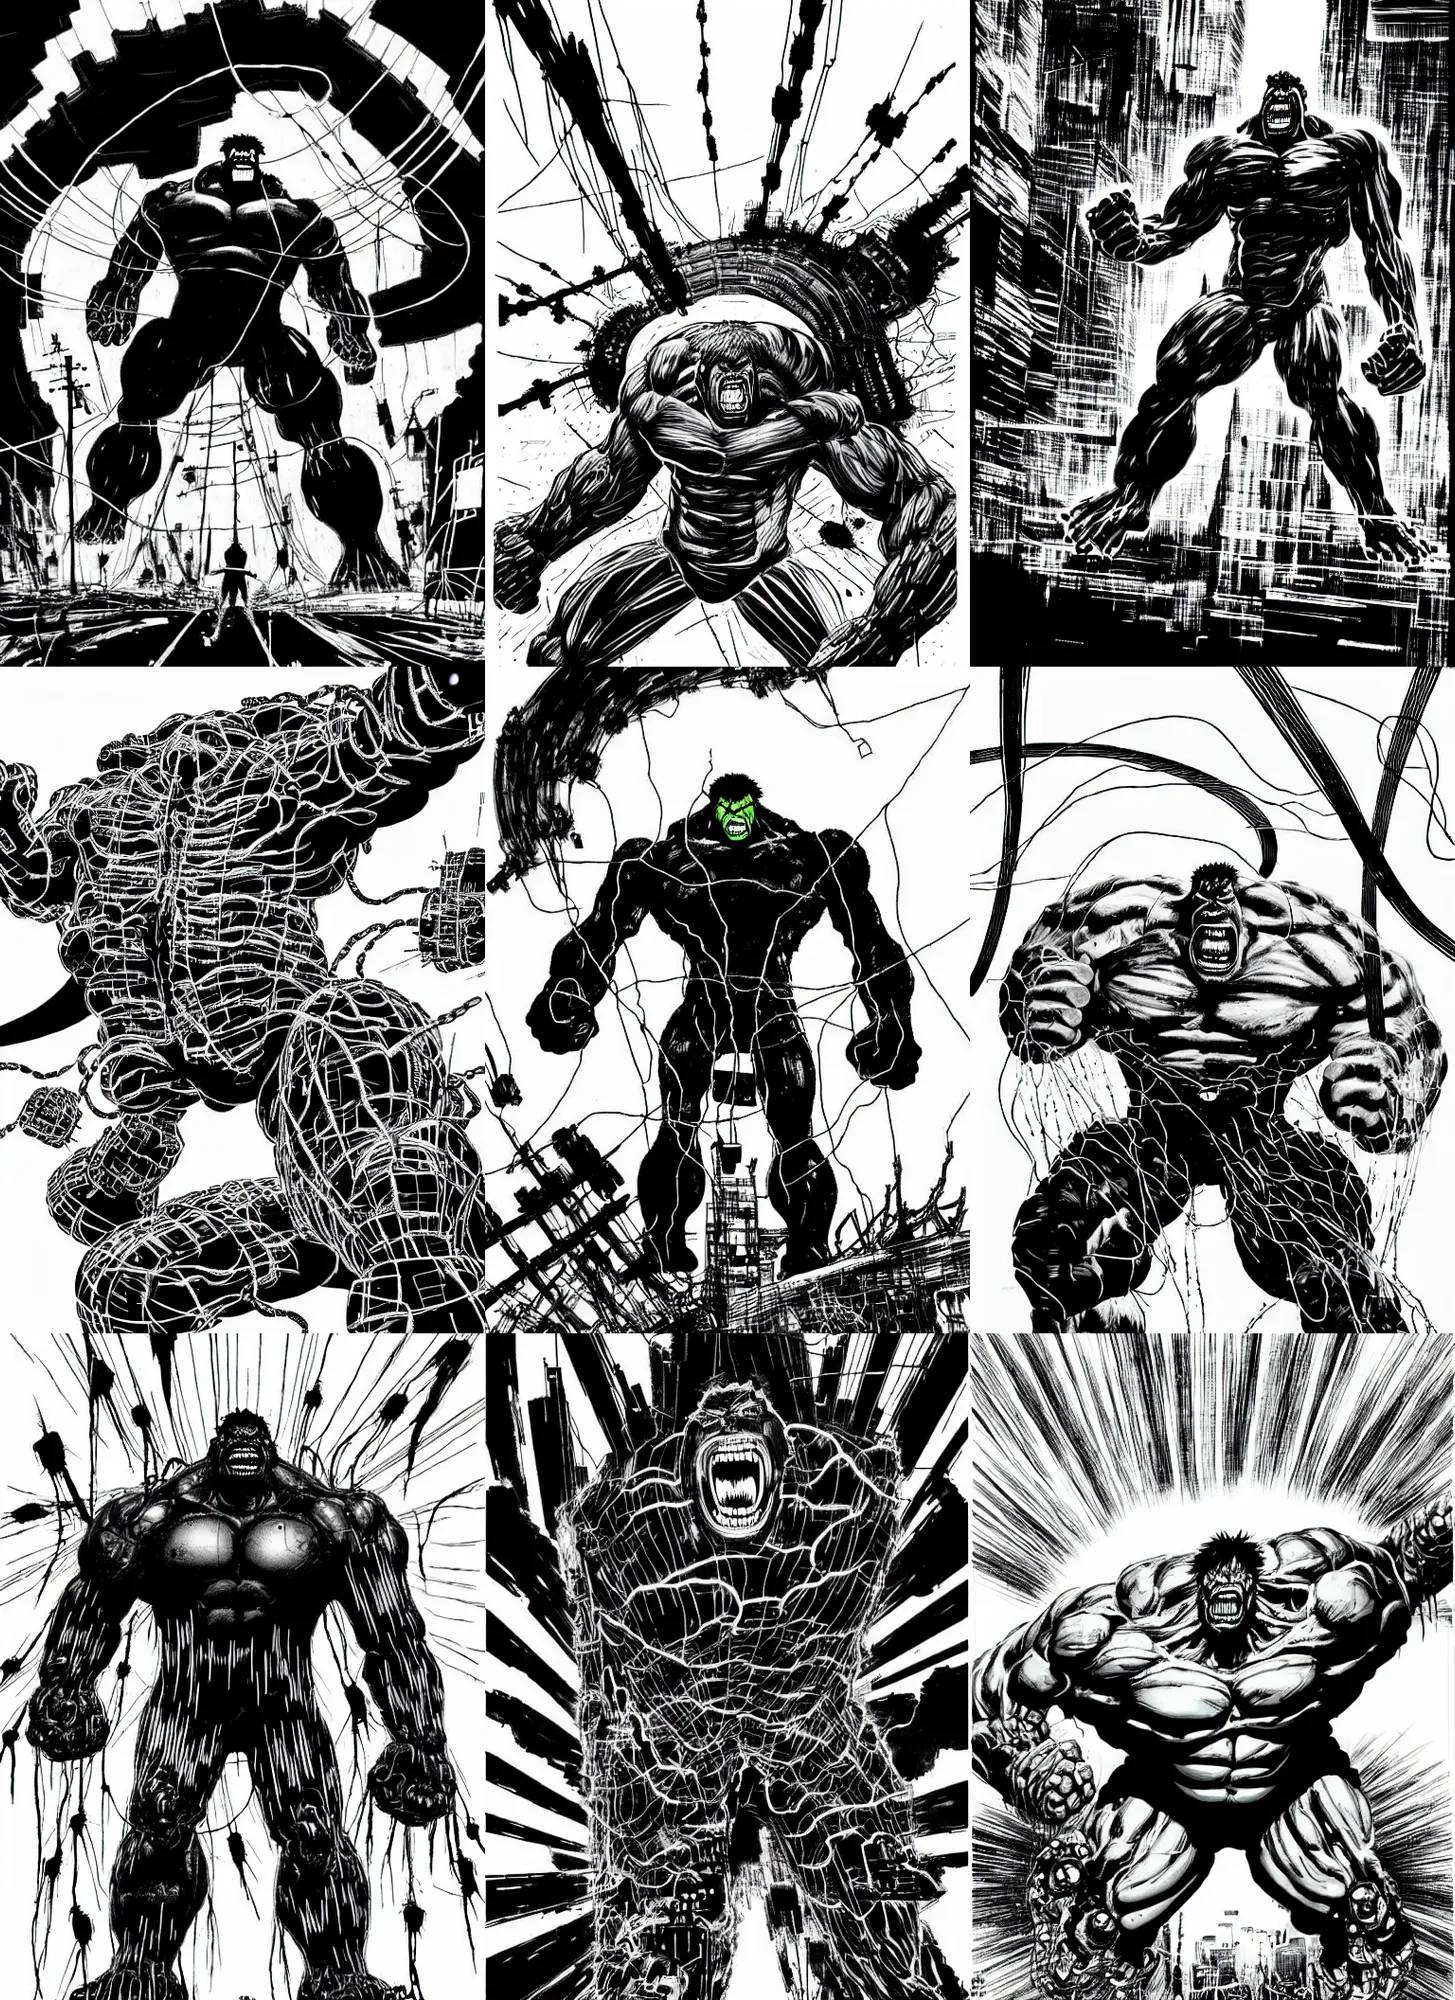 Prompt: black and white hulk with wires screaming in nuclear explosion, by tsutomu nihei, black and white, no color, destroed cybernetic city background